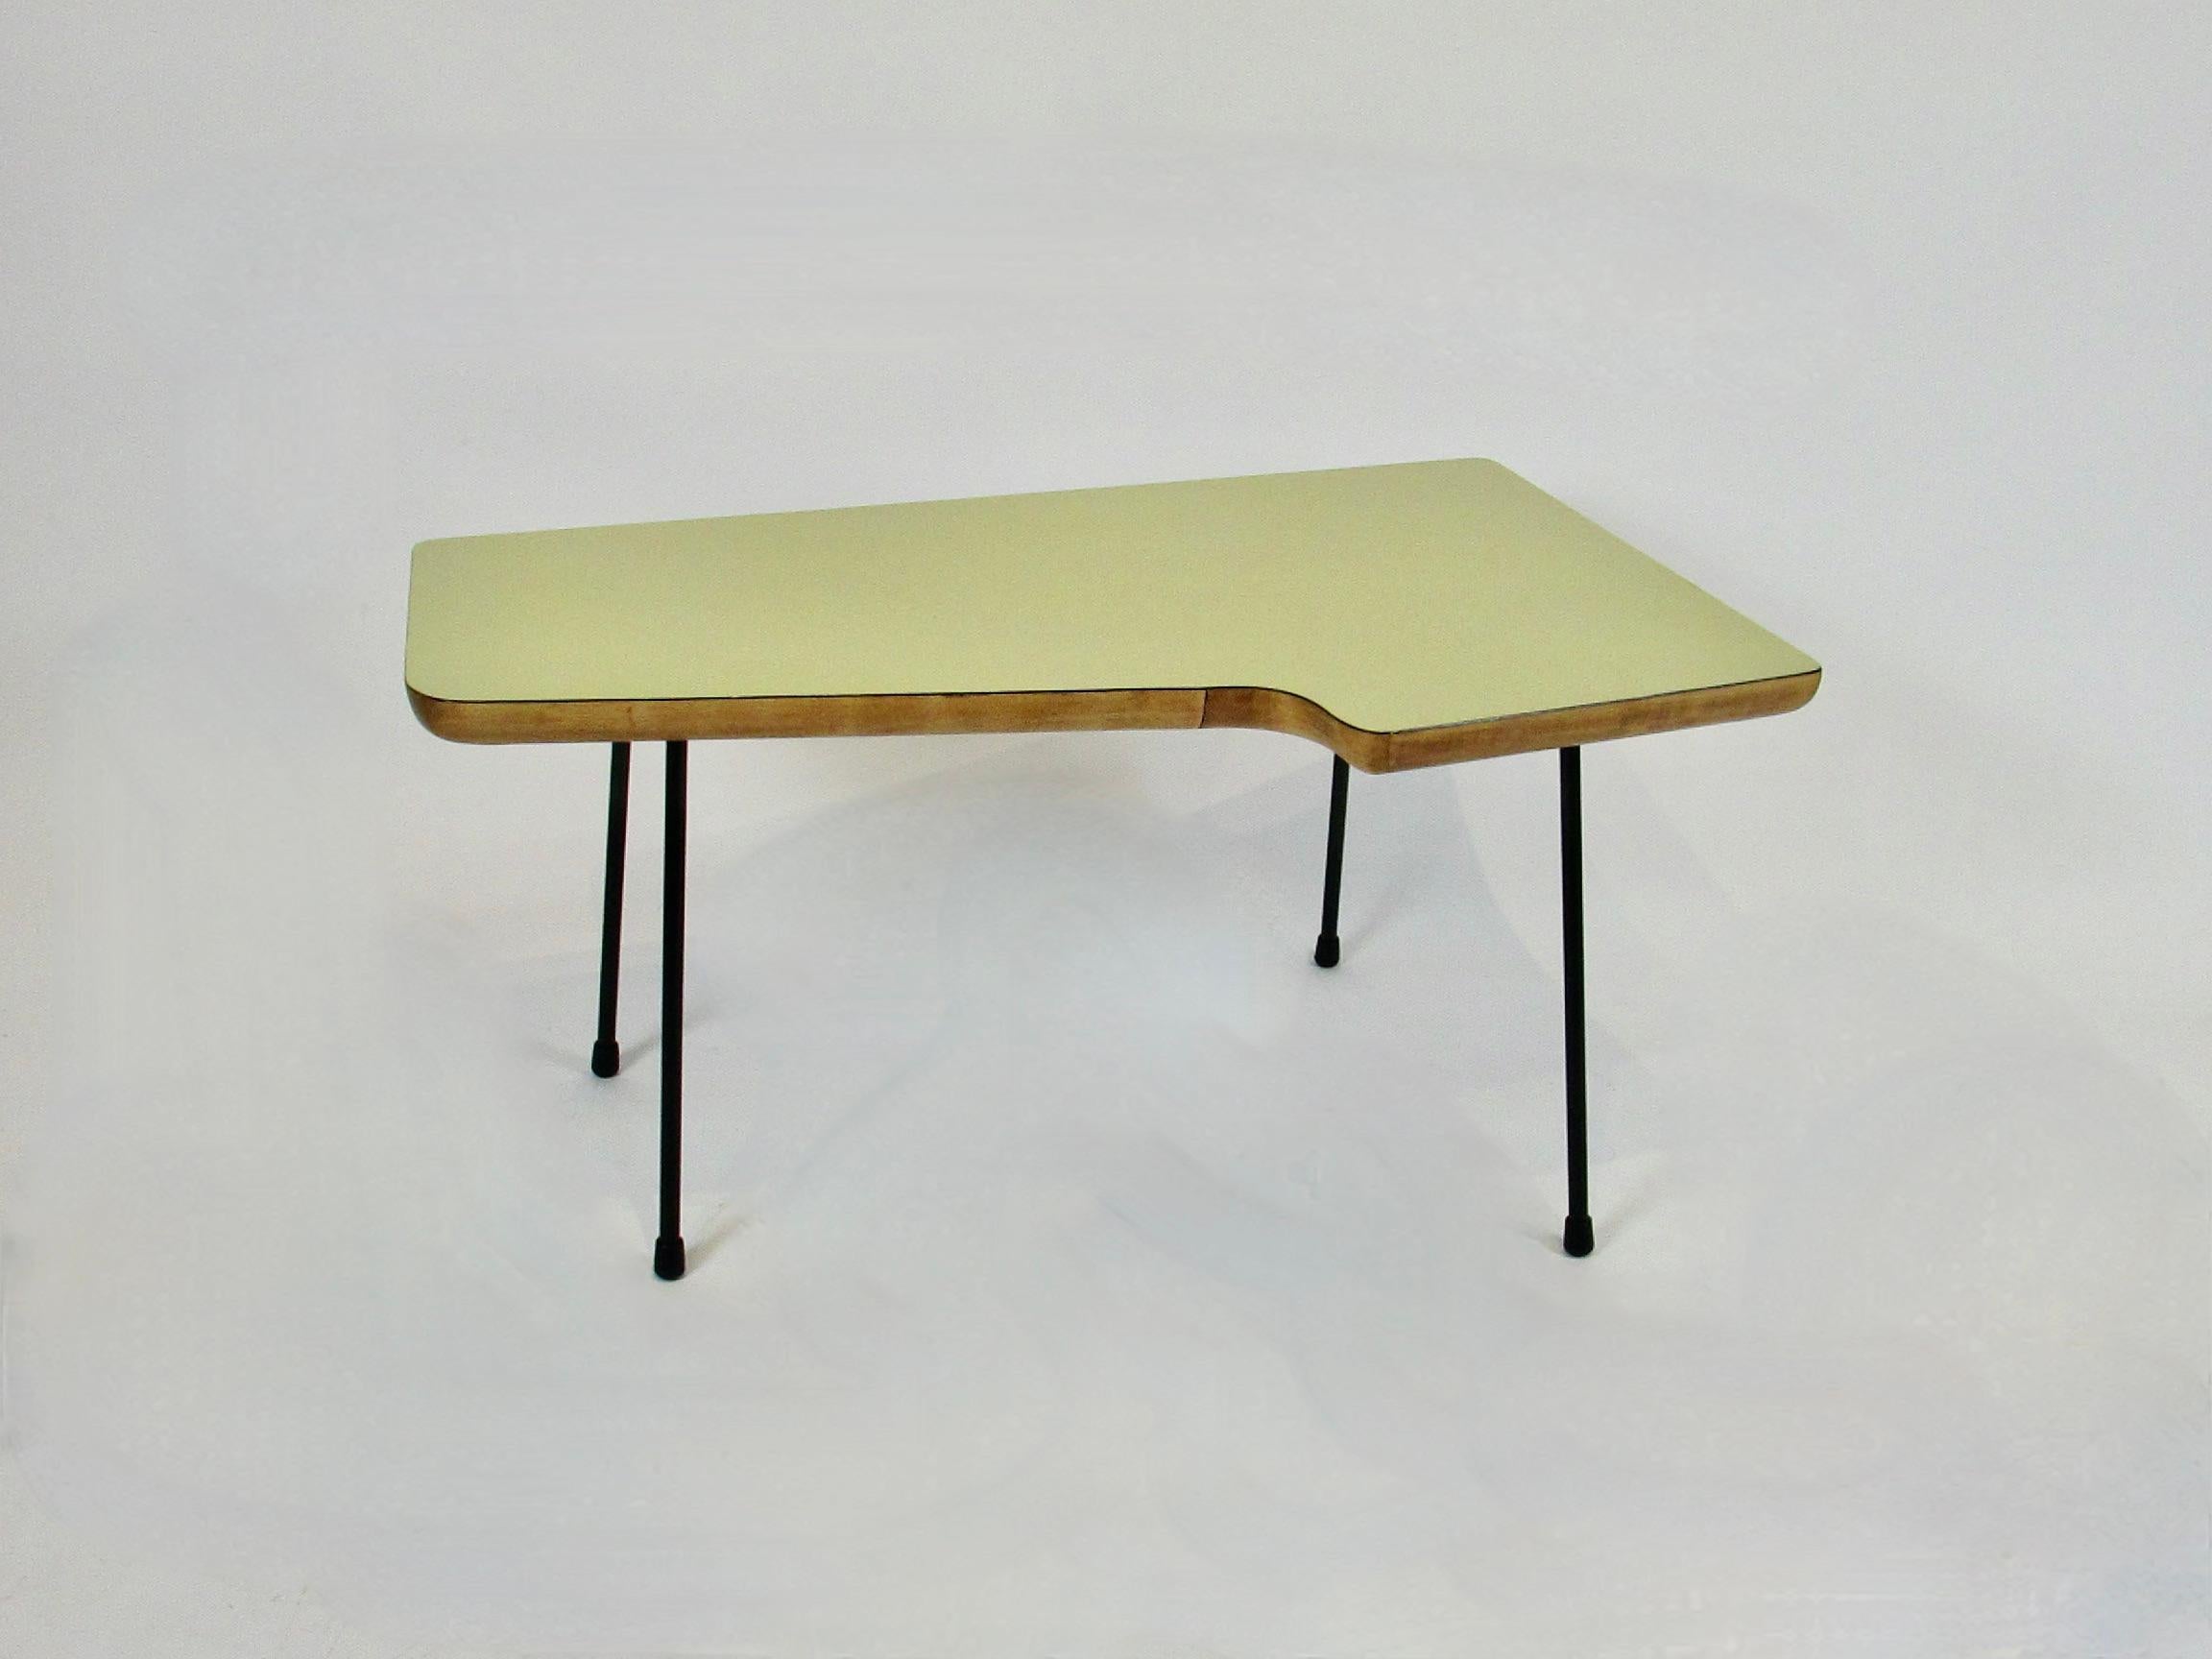 Carter Winter worked with Ray Komai both true midcentury American modernist designers. This table identifies closely with their style and design. Wonderfully organic form in great condition. Laminate top with rounded wood apron underneath. Supported